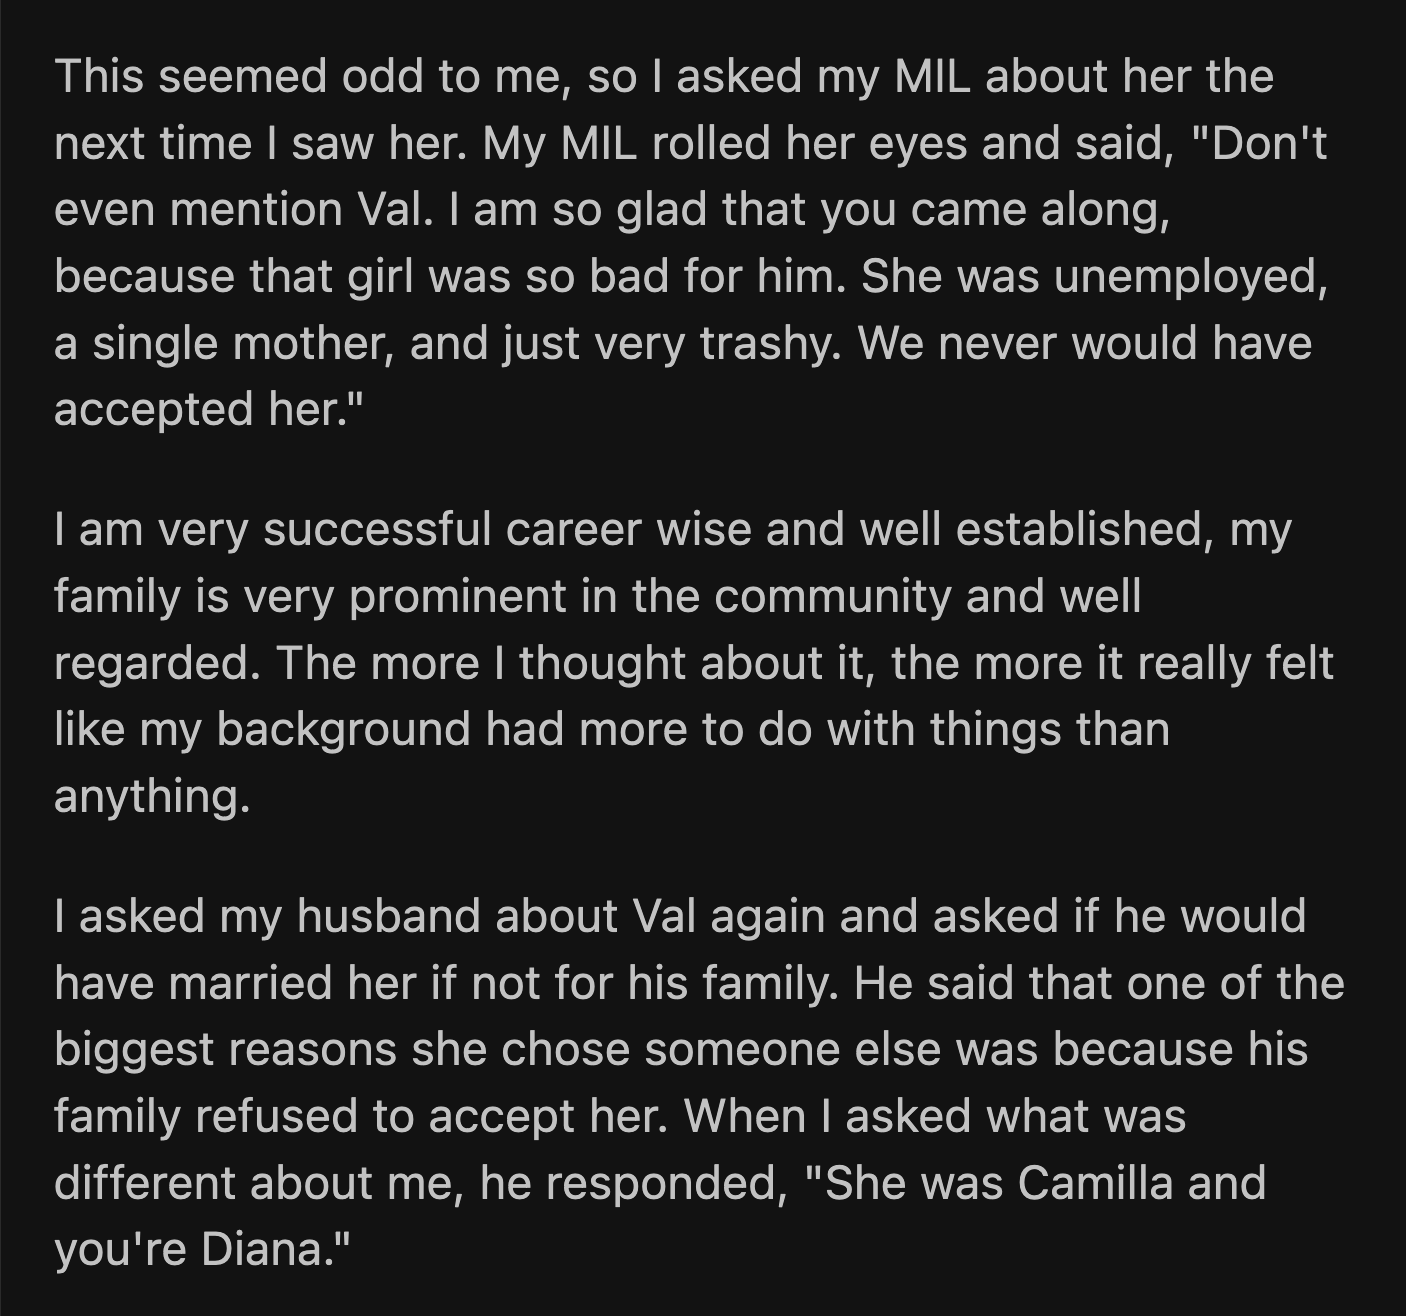 When OP asked her husband about it, he said one of the reasons he chose someone else was because of his family's opposition to Val. OP asked what was different about her. Her husband said, 